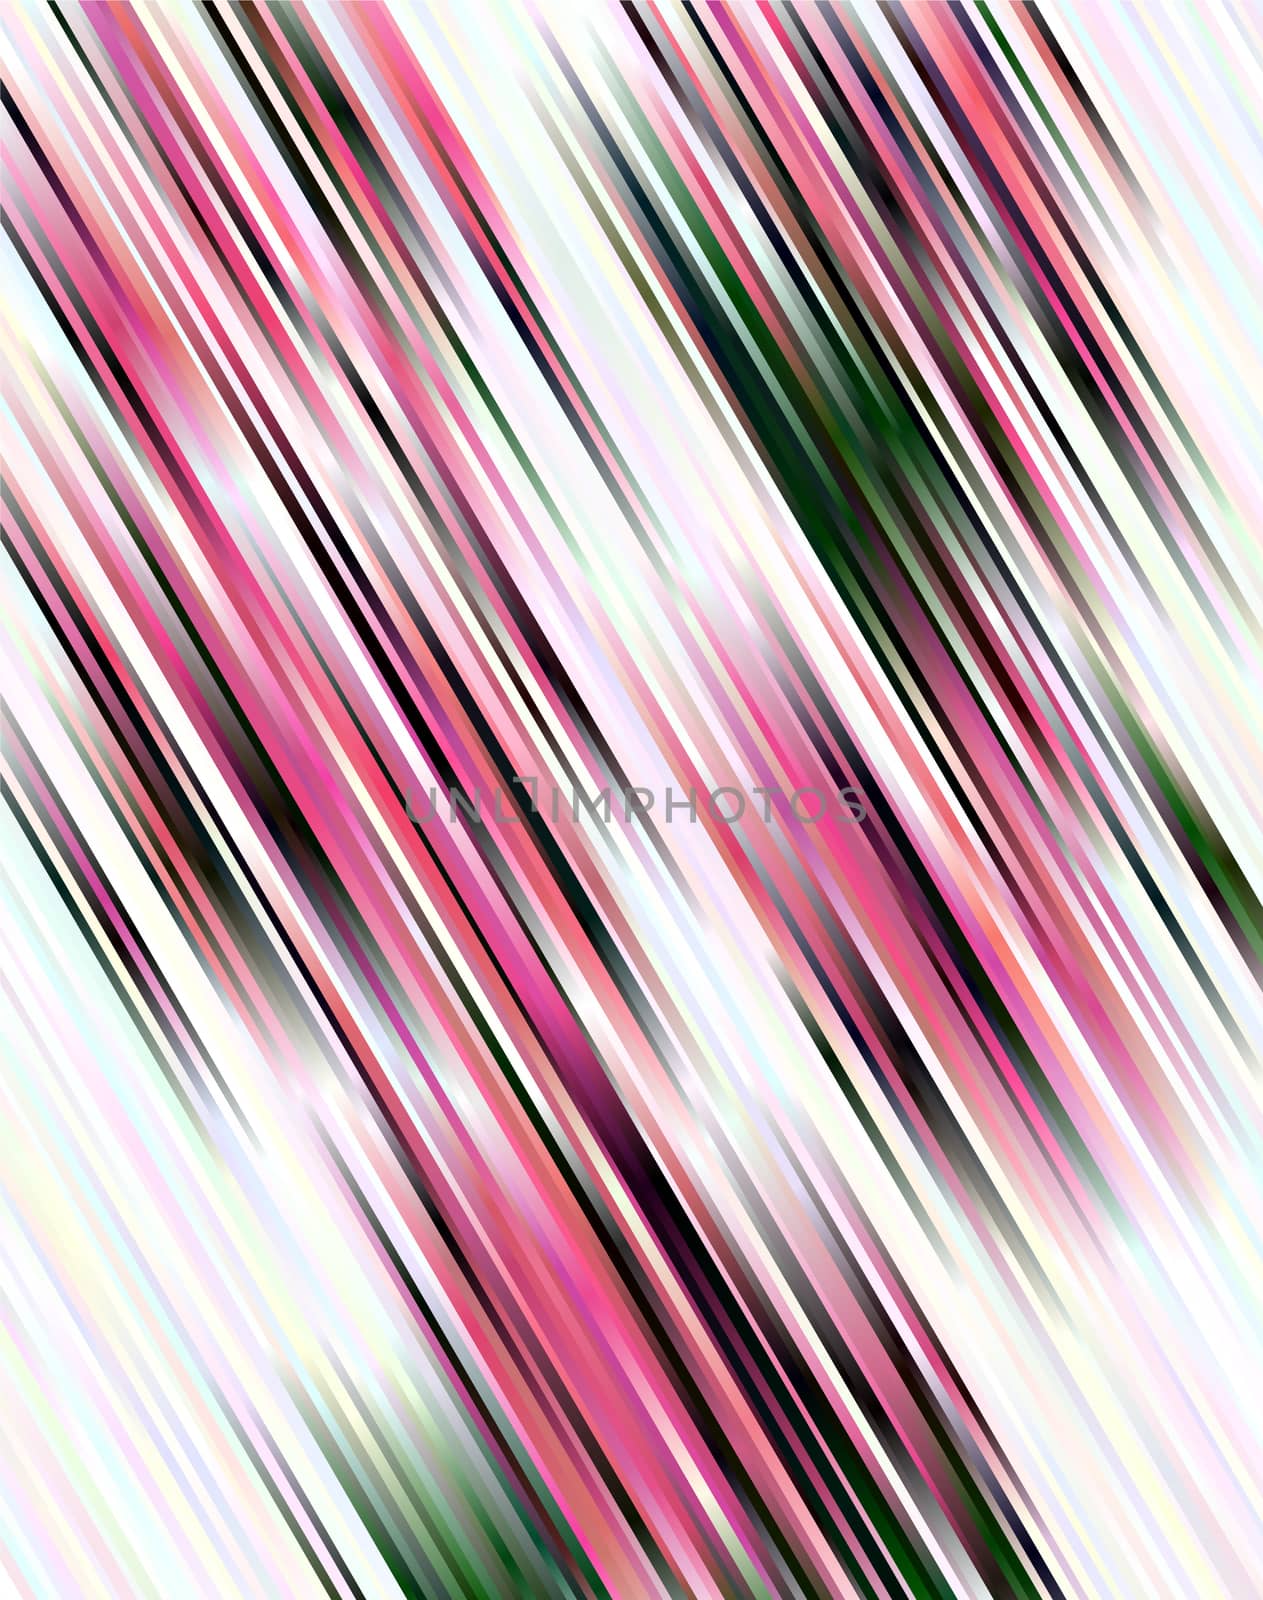 Abstract magenta, black and white diagonal stripes background by CherJu